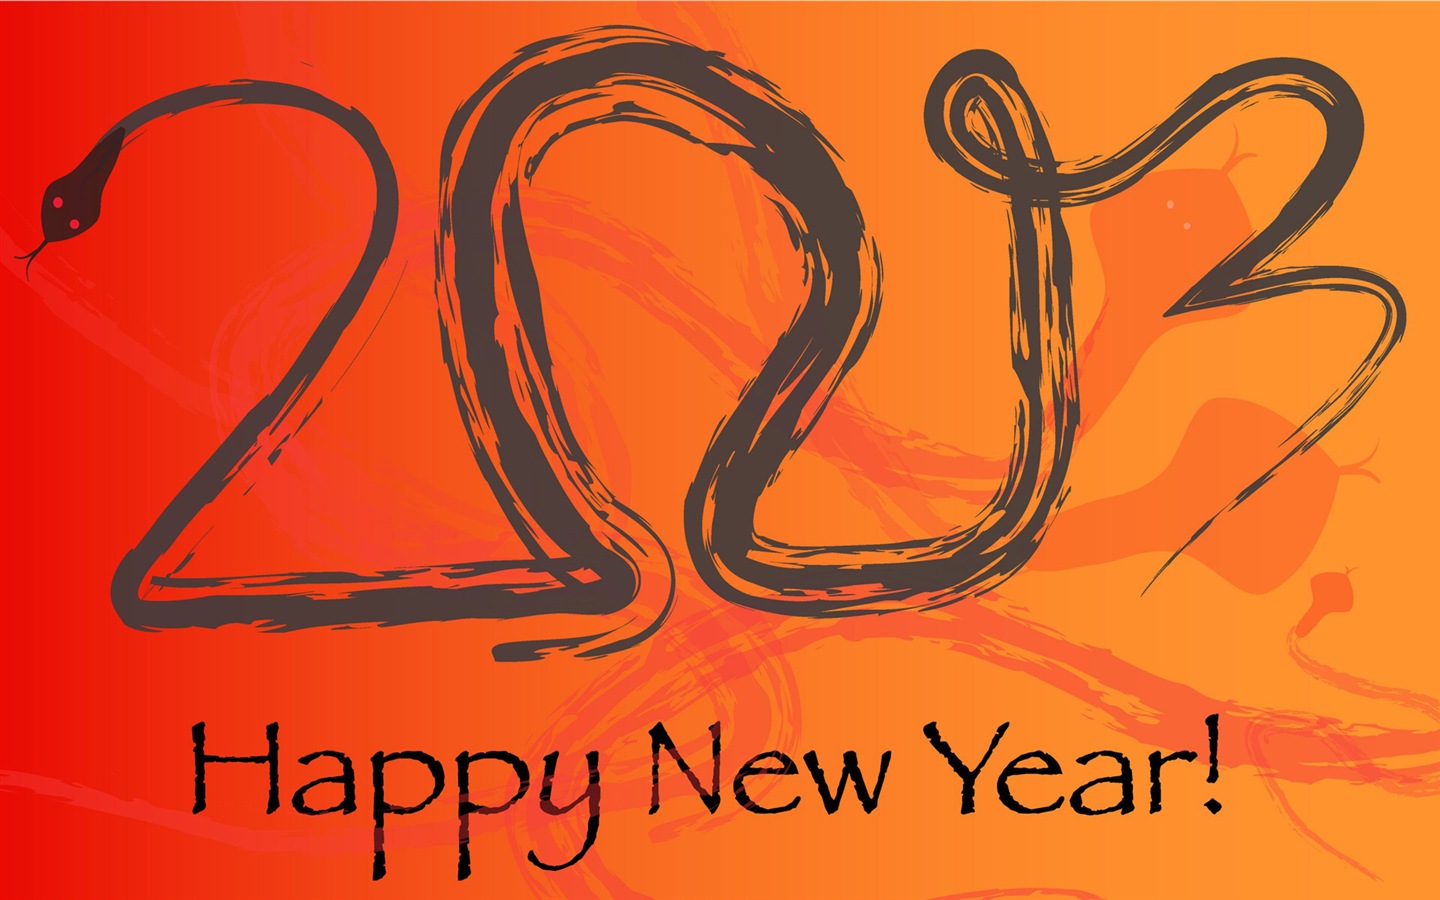 2013 Happy New Year HD wallpapers #11 - 1440x900